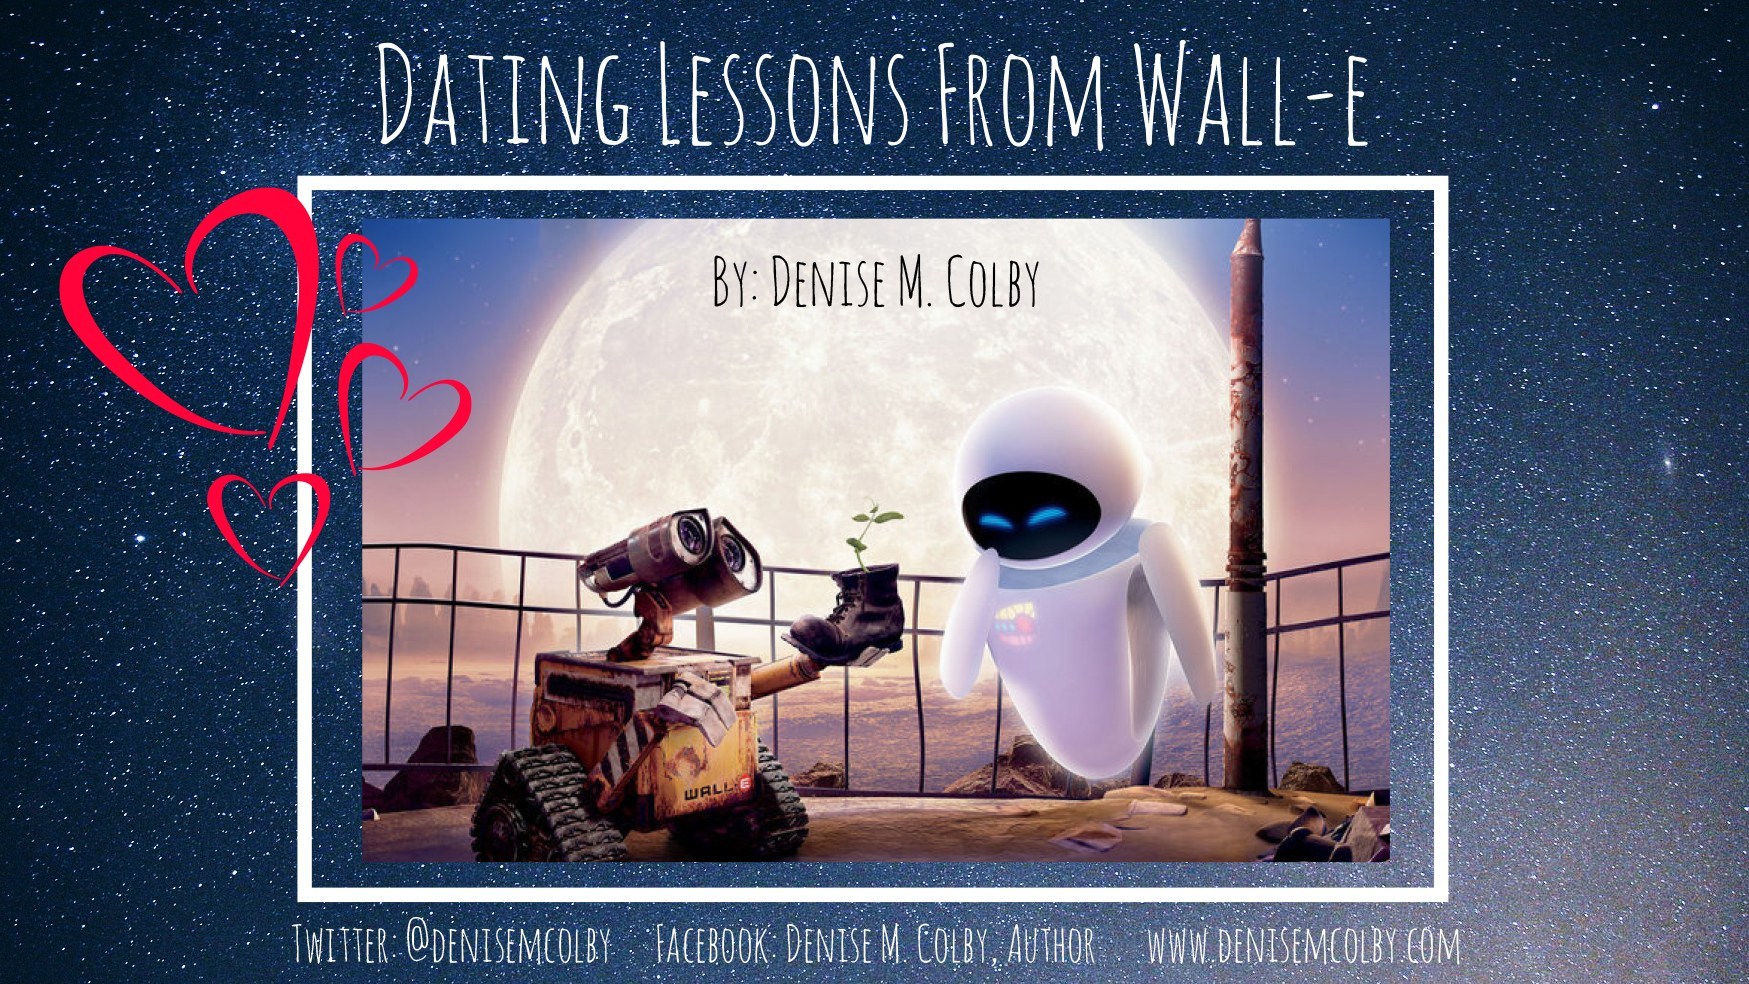 Another Example of Disney for fun blog post; this one titled Dating Lessons from Wall-E by Denise M. Colby